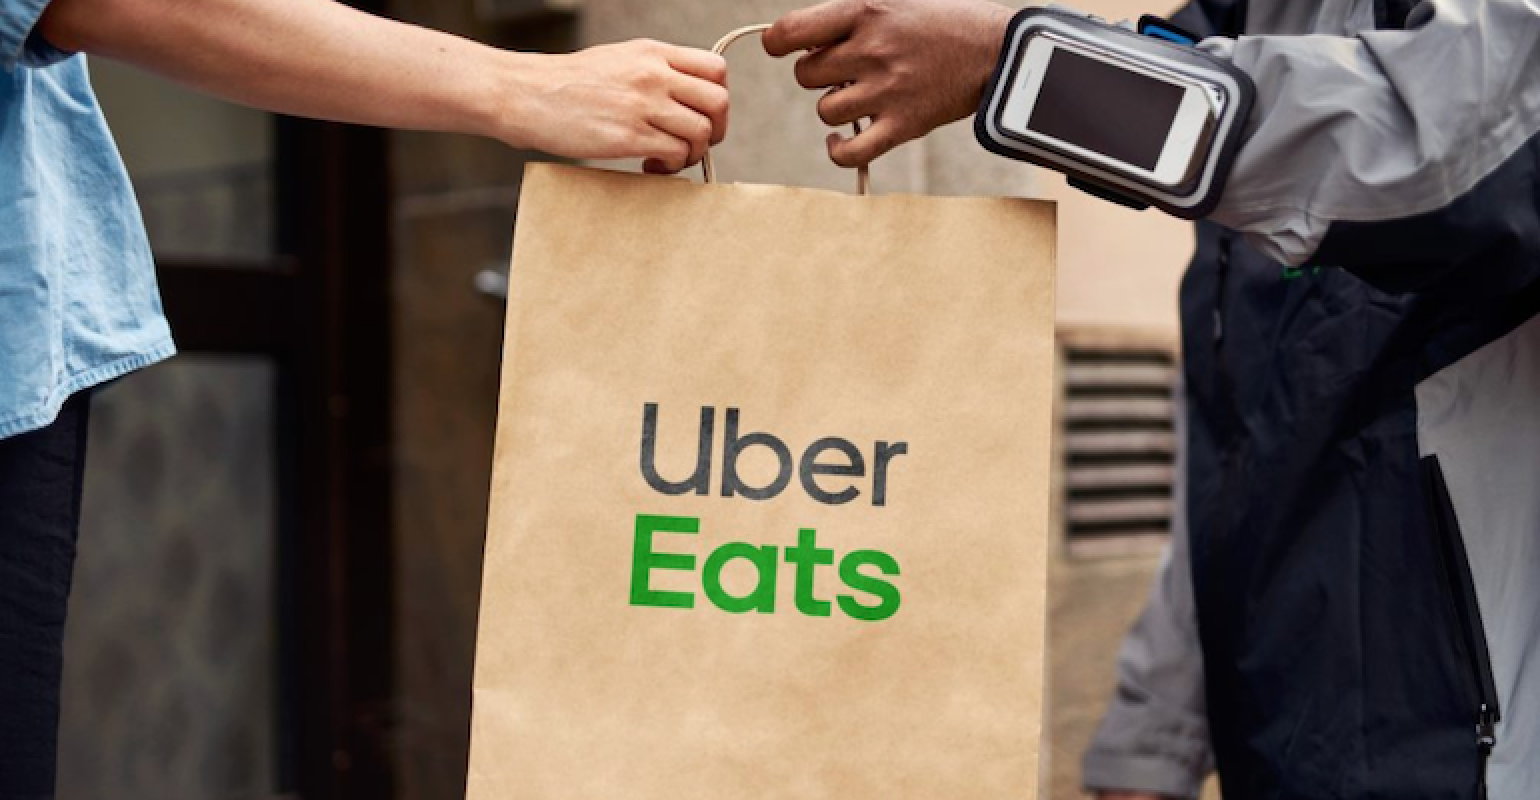 Uber Eats extends grocery delivery reach with Albertsons